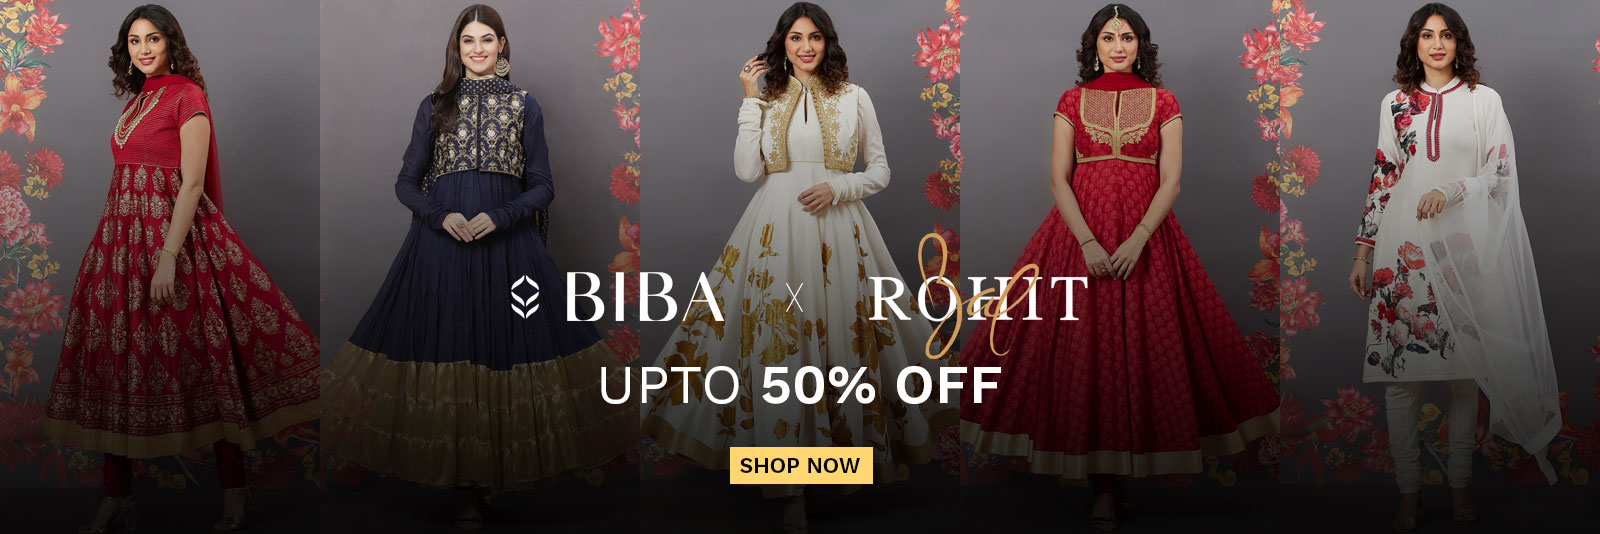 Biba - Get Upto 50% off on Rohit Bal's Women's Ethnicwear Collection